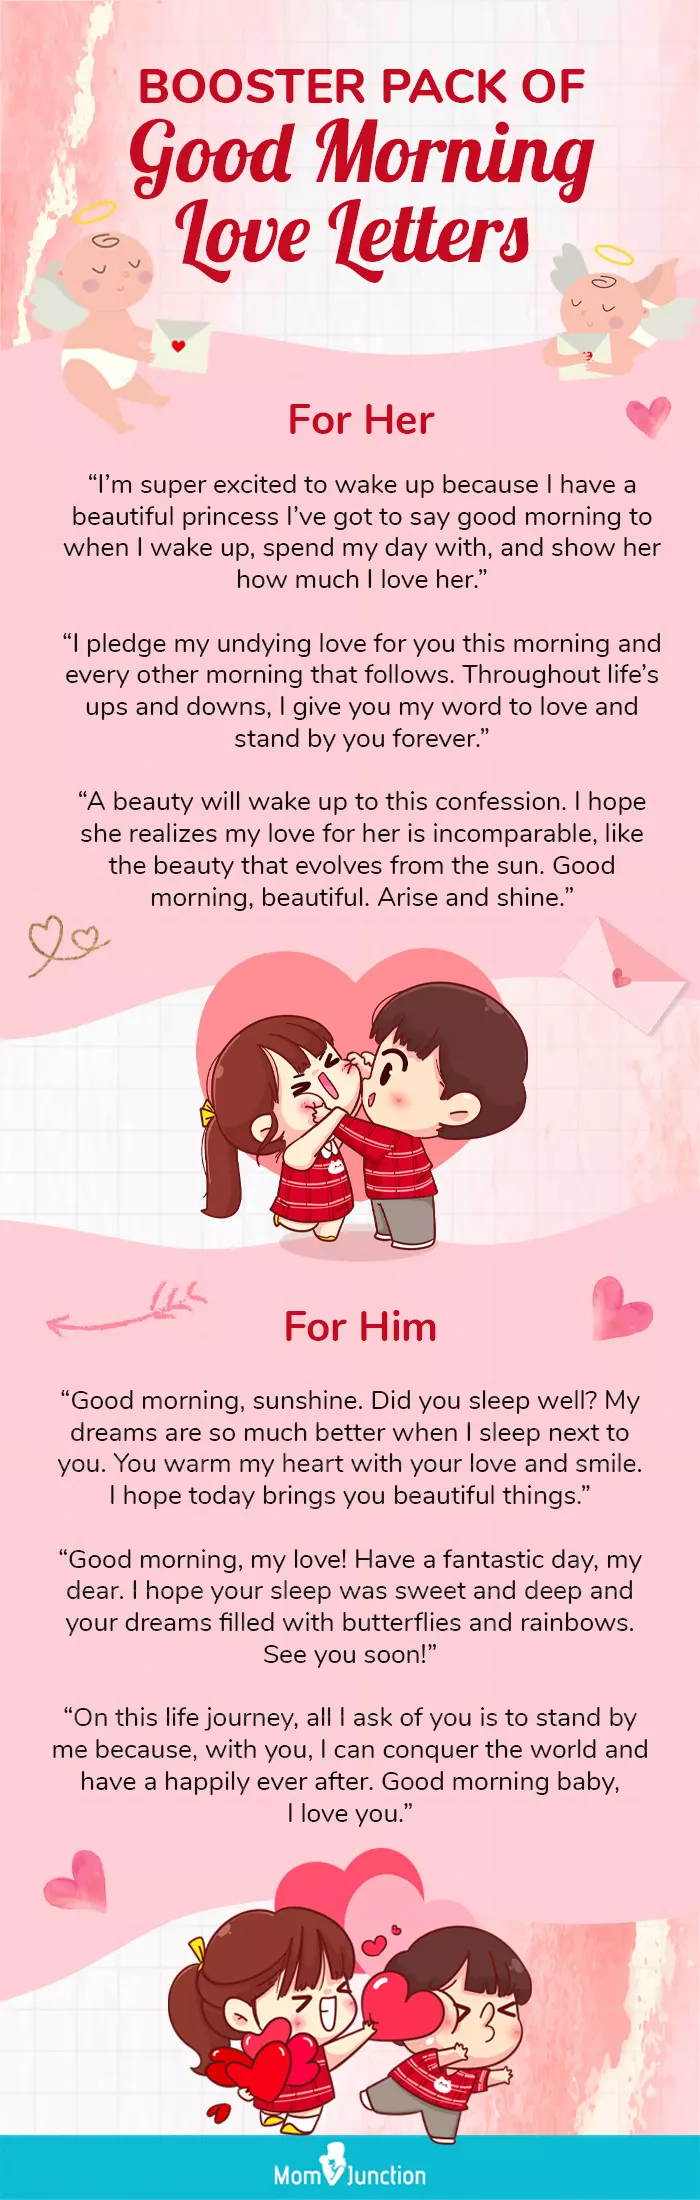 good morning love letters (infographic)